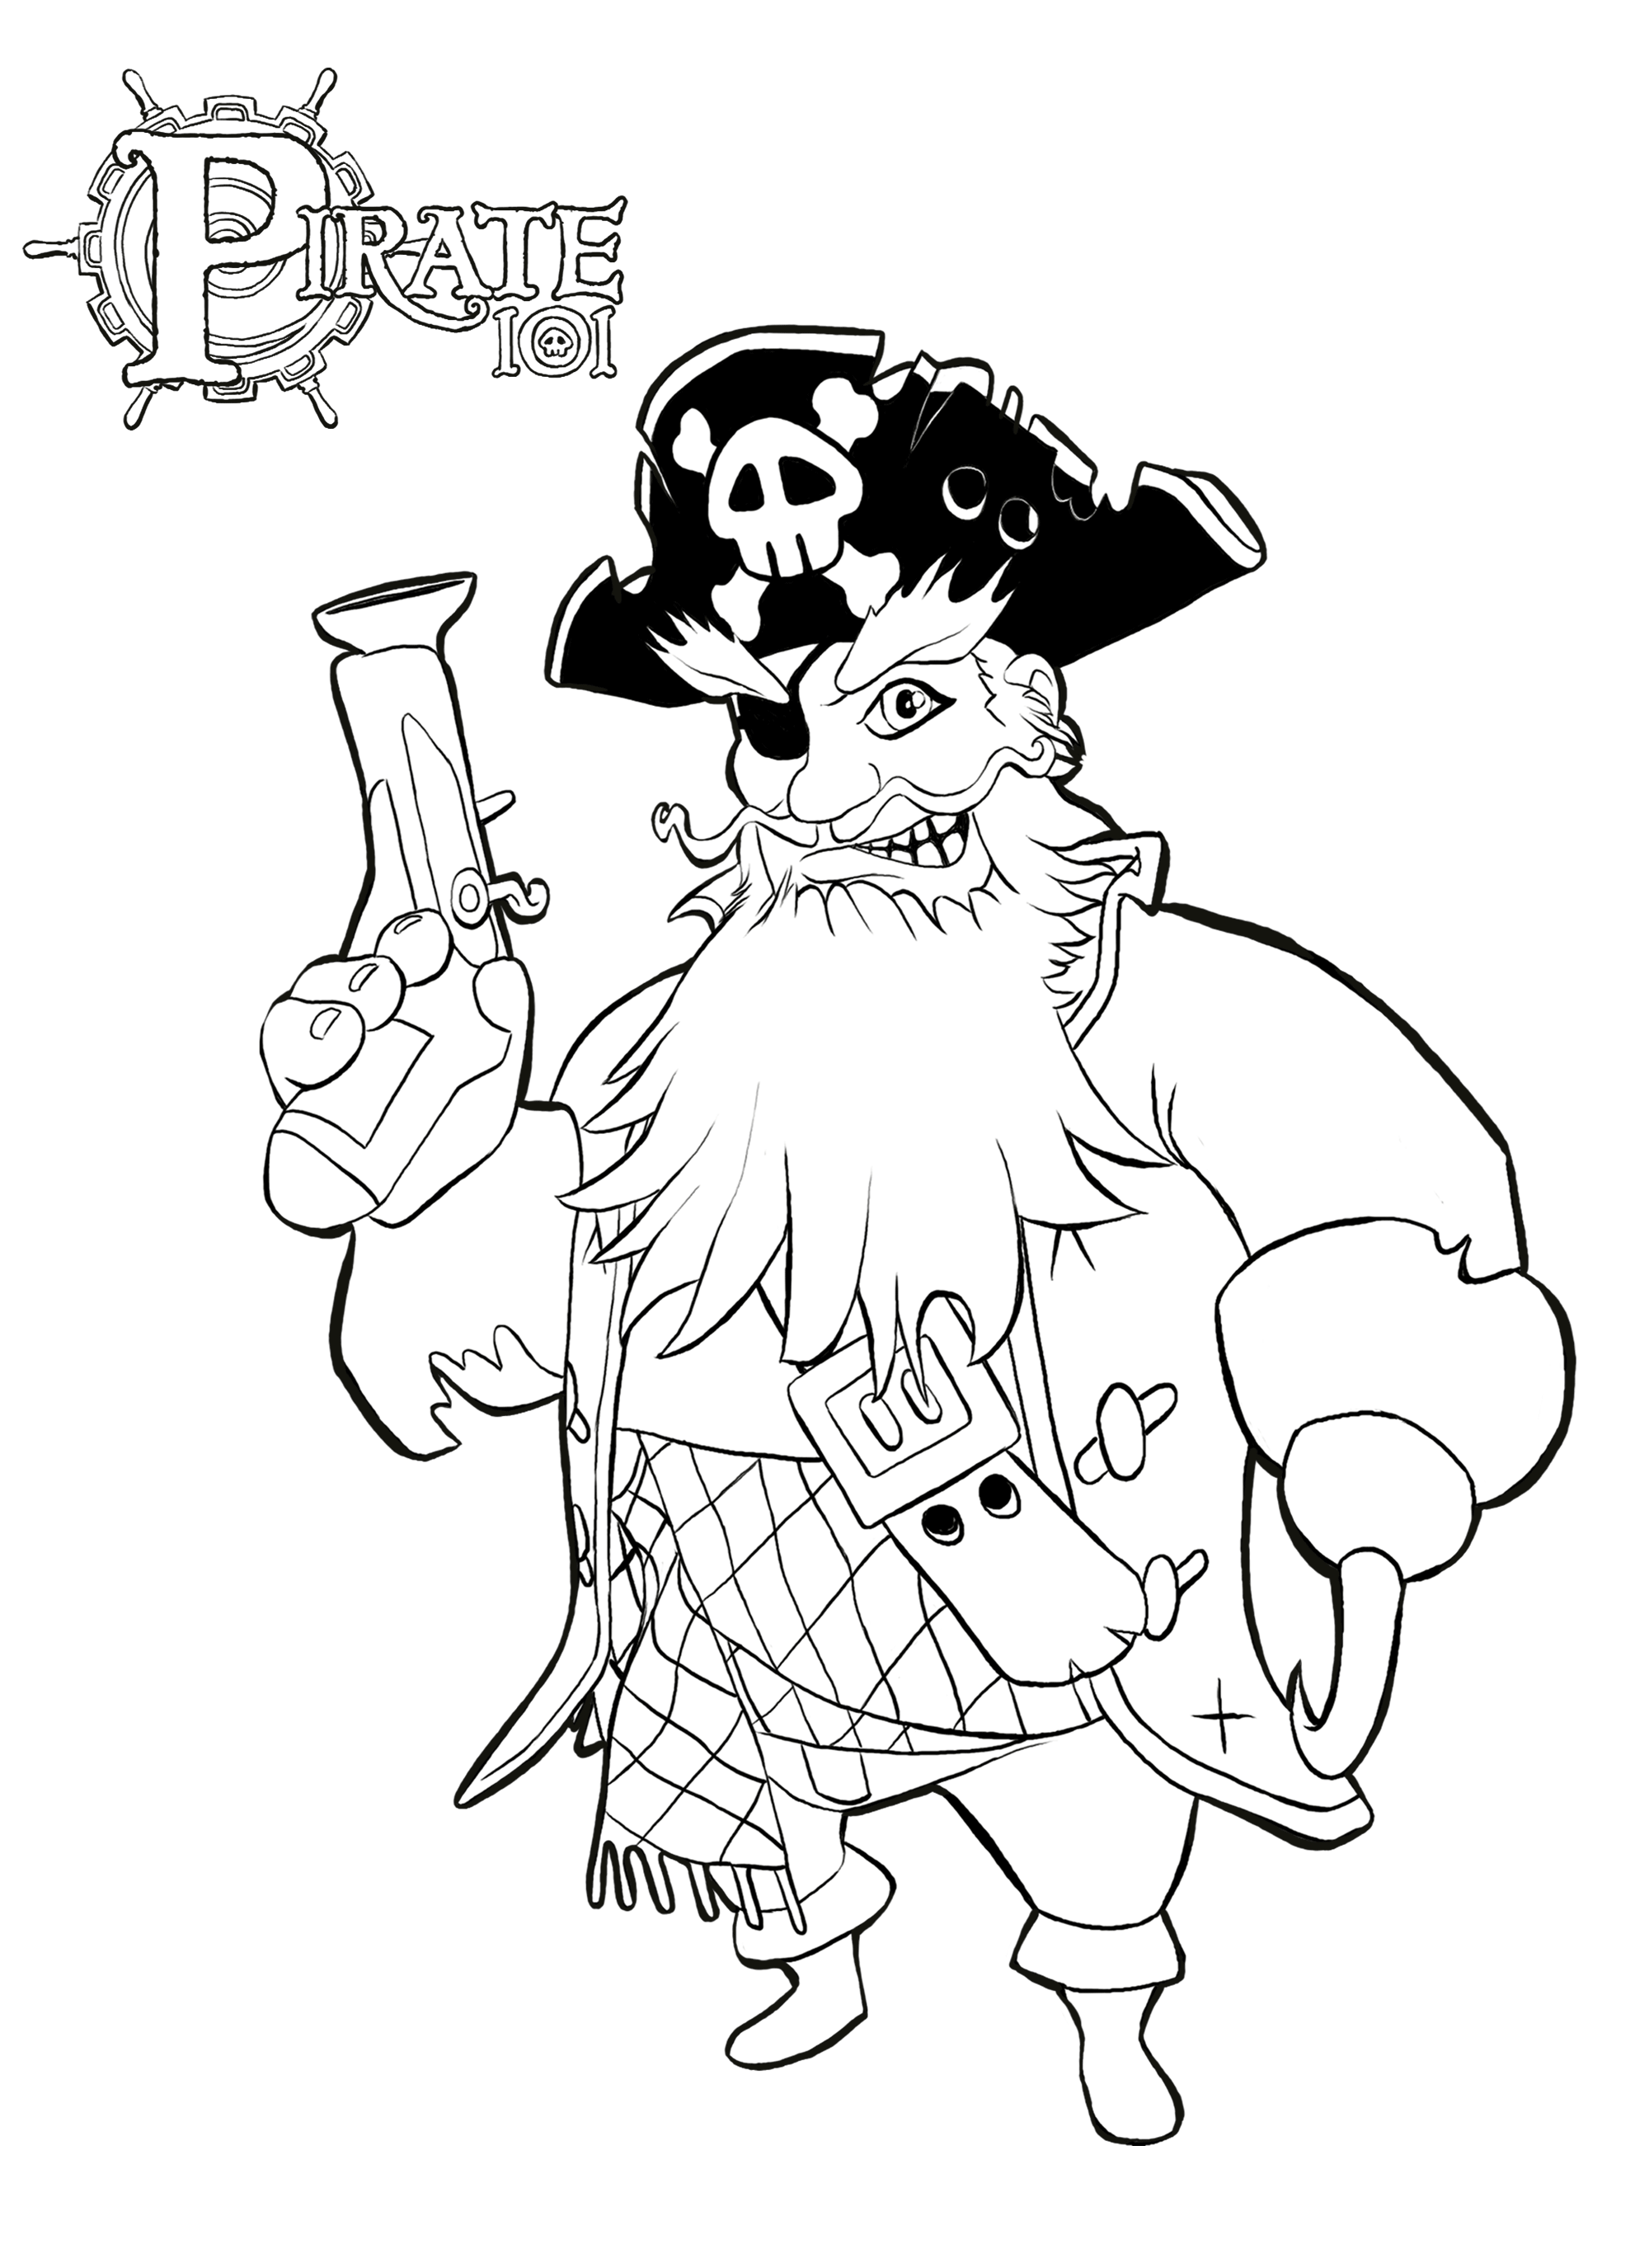 Pirate Coloring Pages Pirate101 Free Online Game